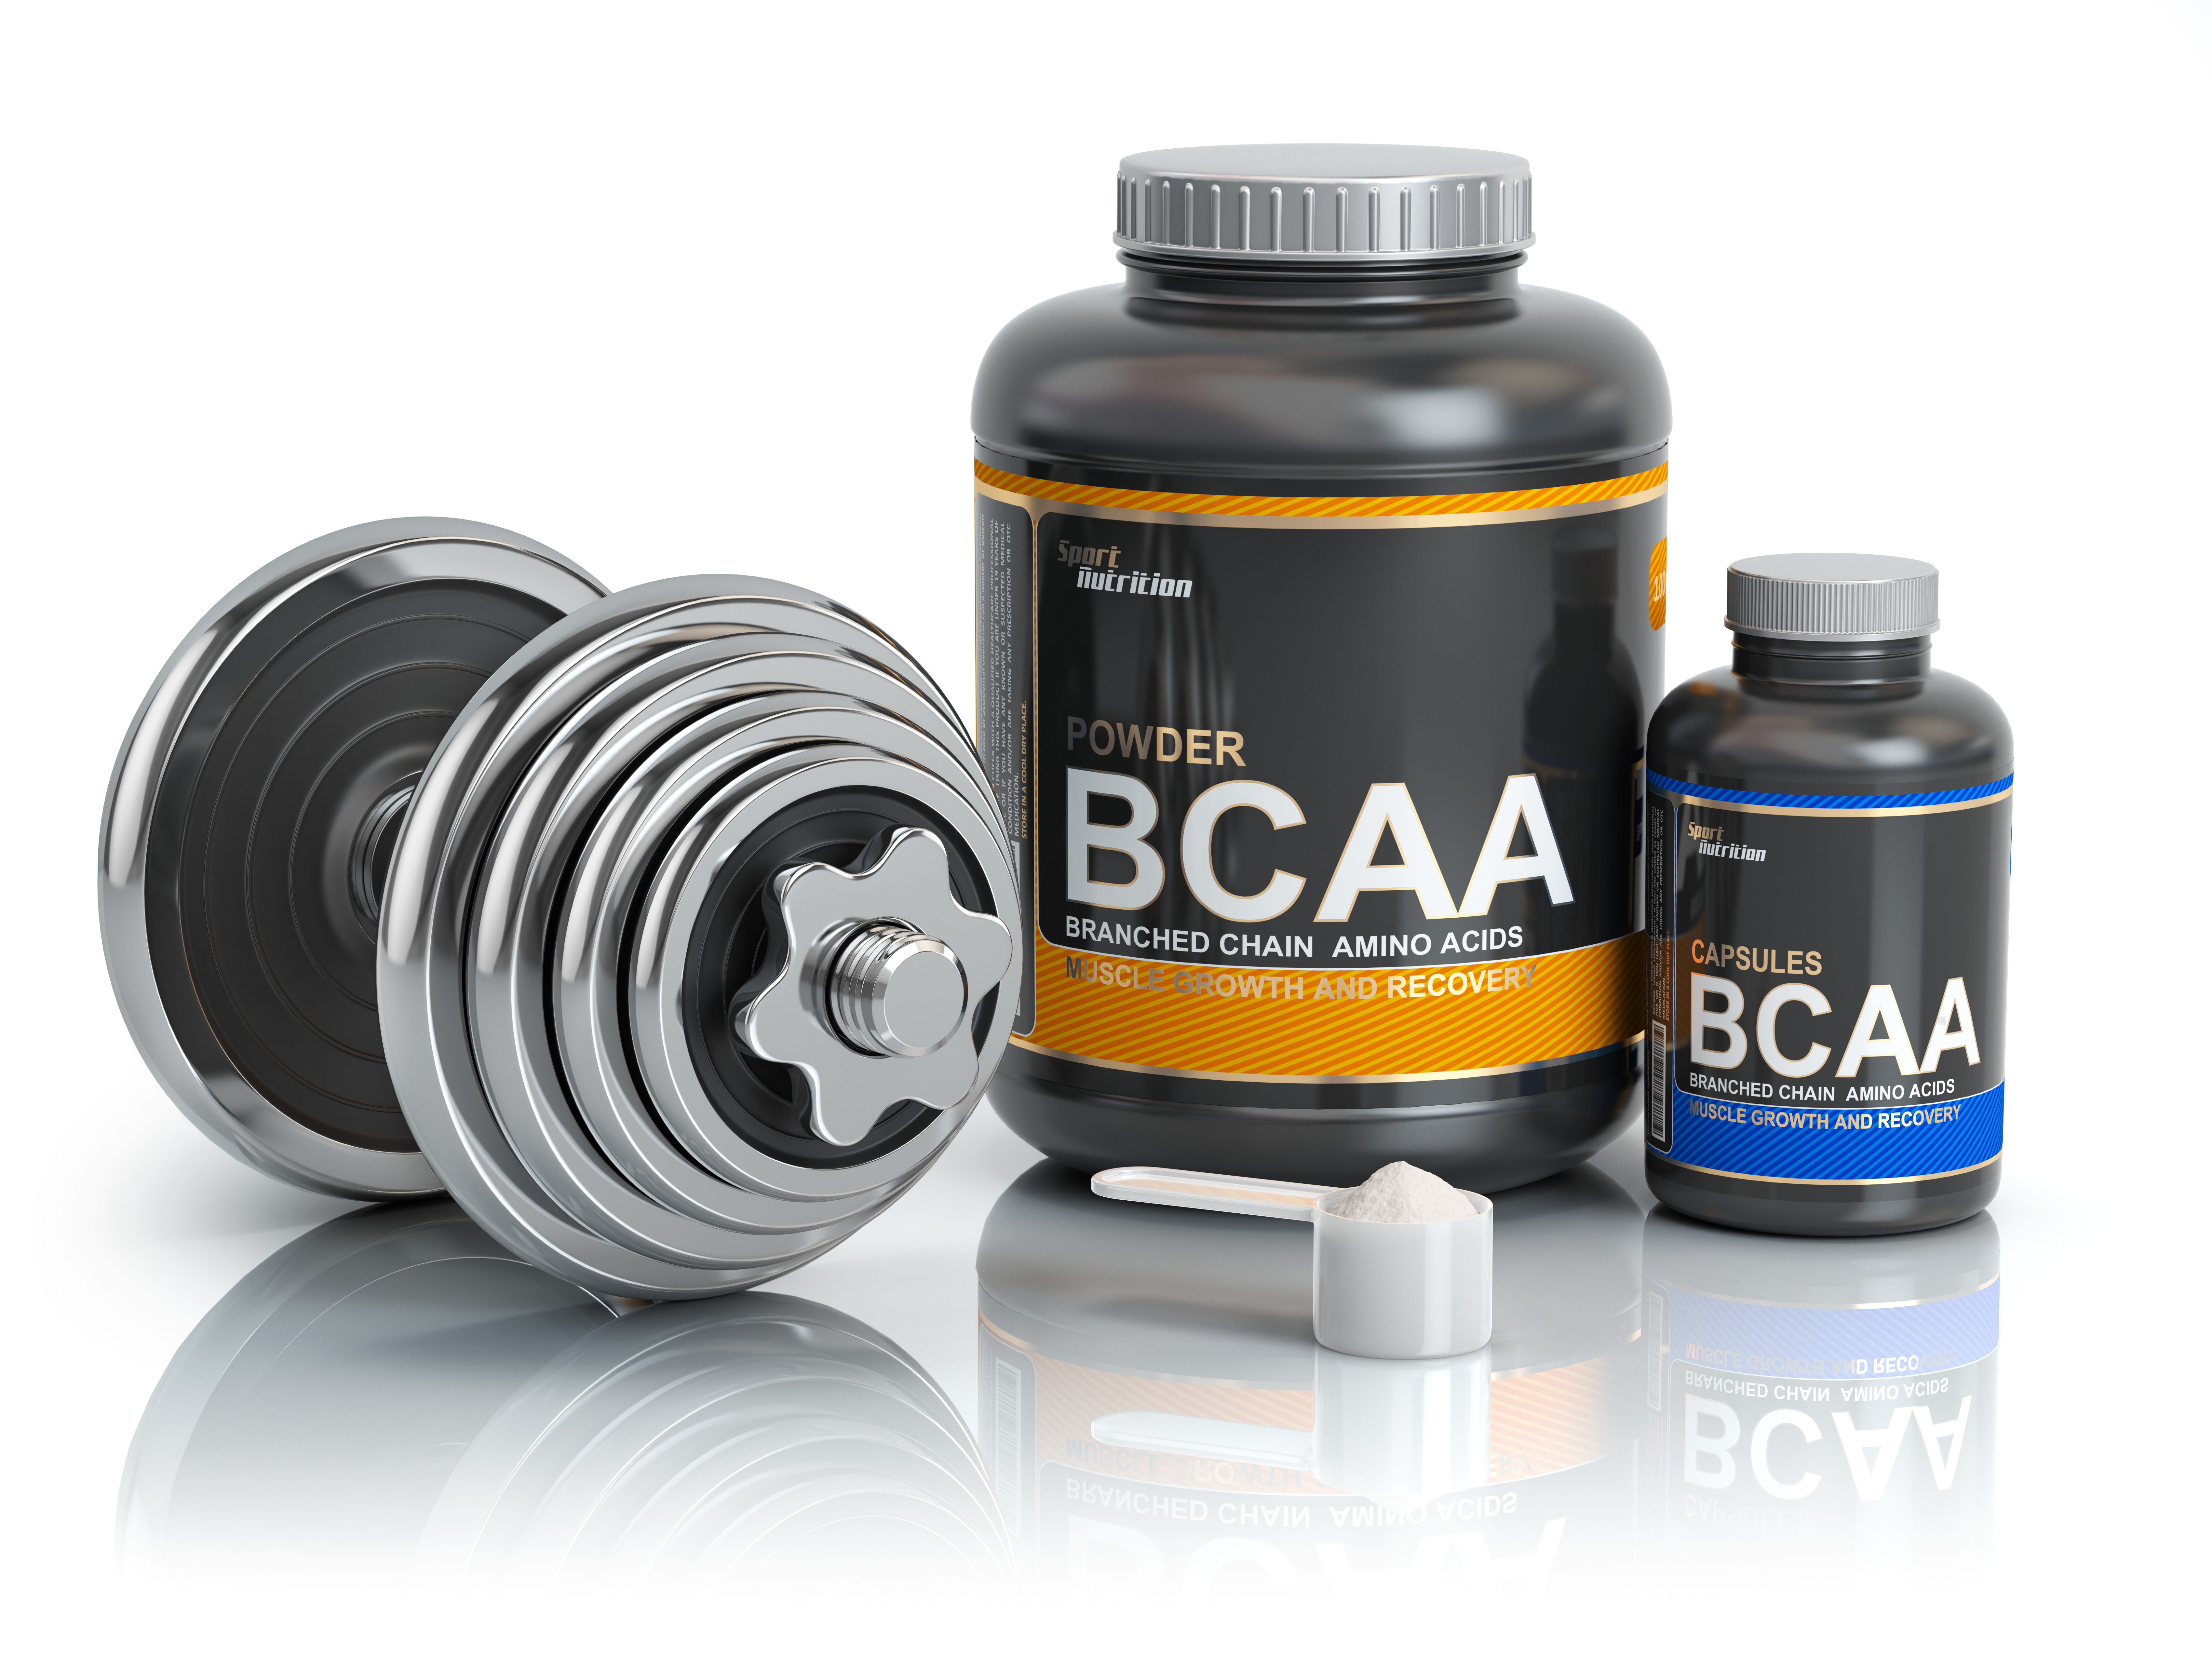 Branched-Chain Amino Acids: Beneficial for Muscle Growth or Just Bogus?